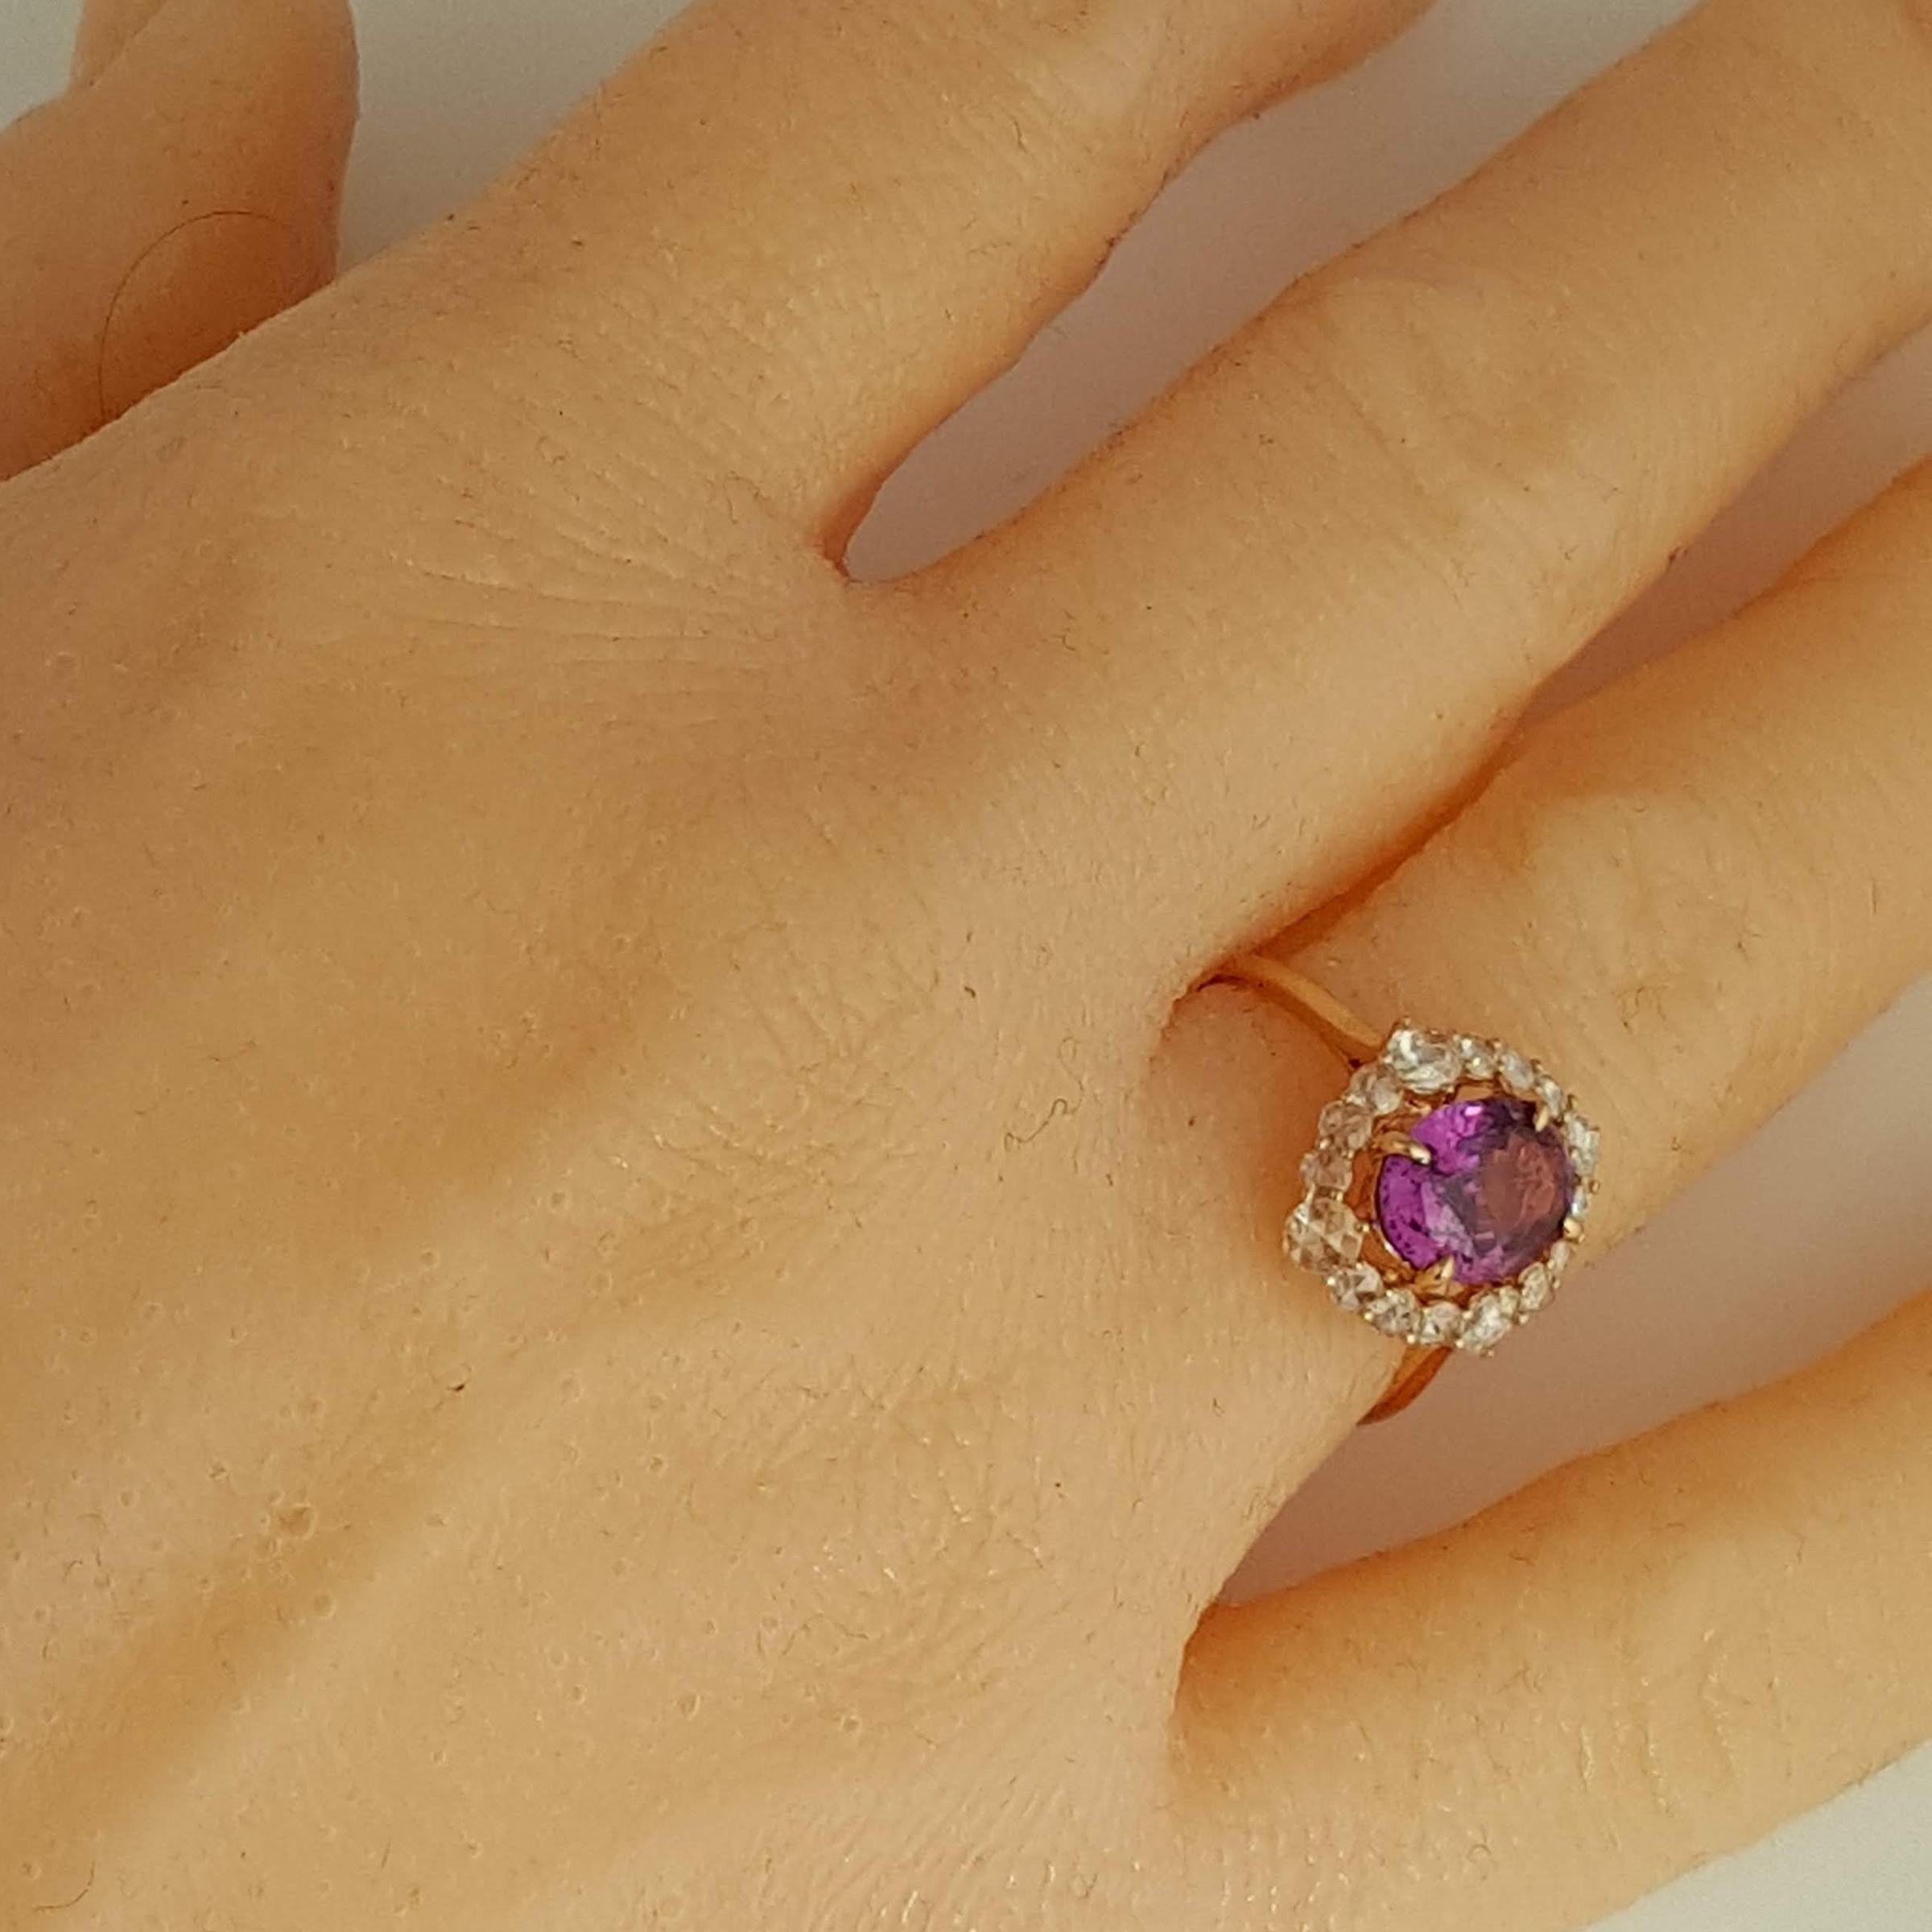 GIA Certified 2.48 Carat Oval Cut Purple-Pink Sapphire Ring in 18k Rose Gold 1